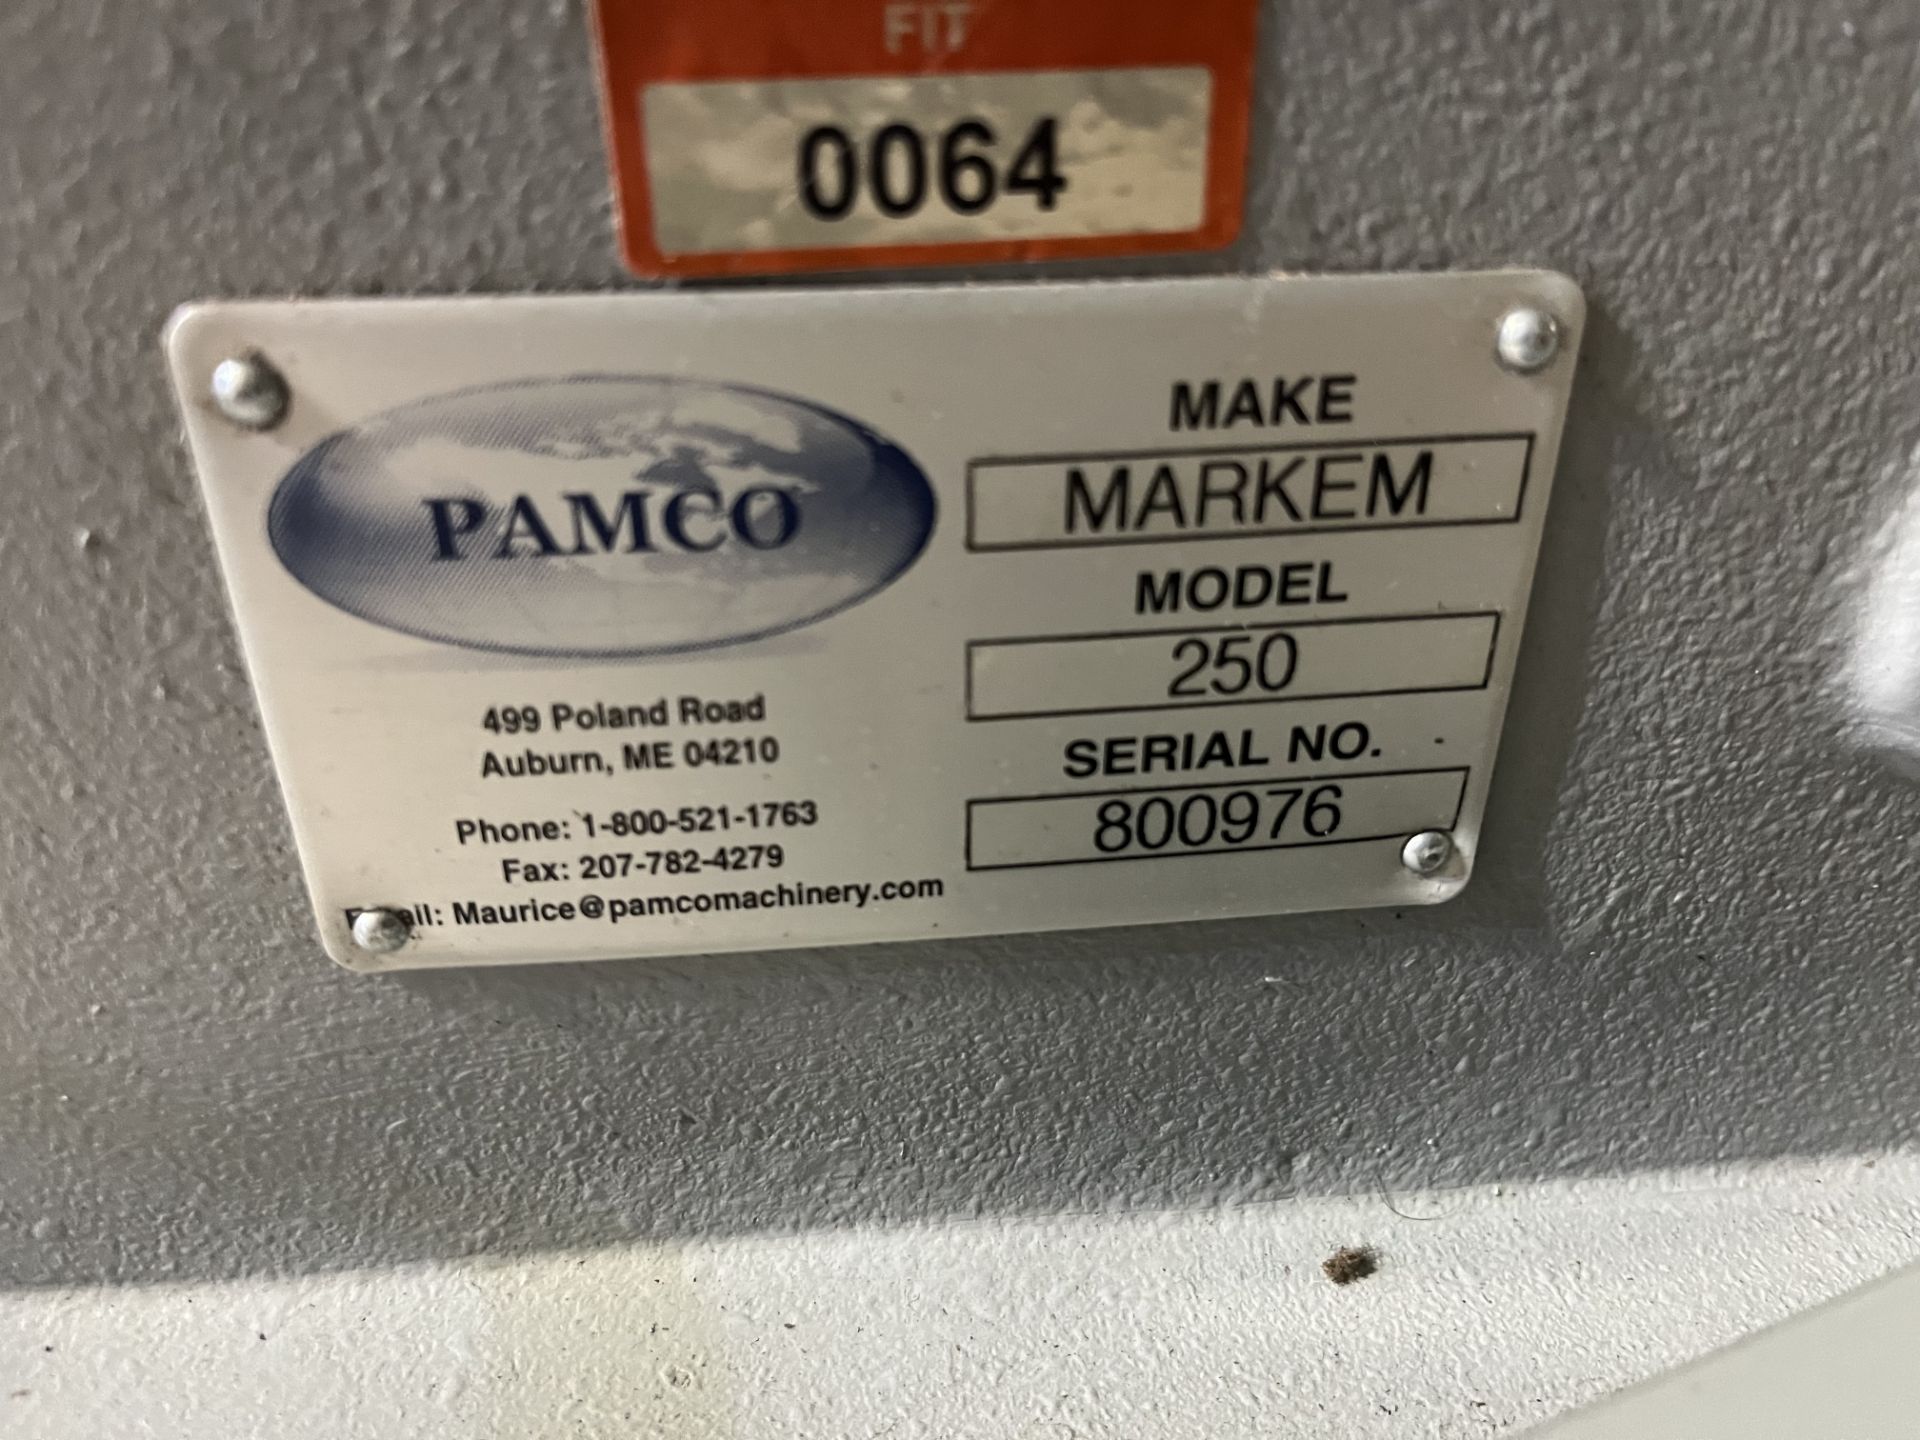 Pamco Markem 250 Foil embosser S/N 800976, in Good, Working Condition, Weight = 313 lbs, with - Bild 5 aus 10